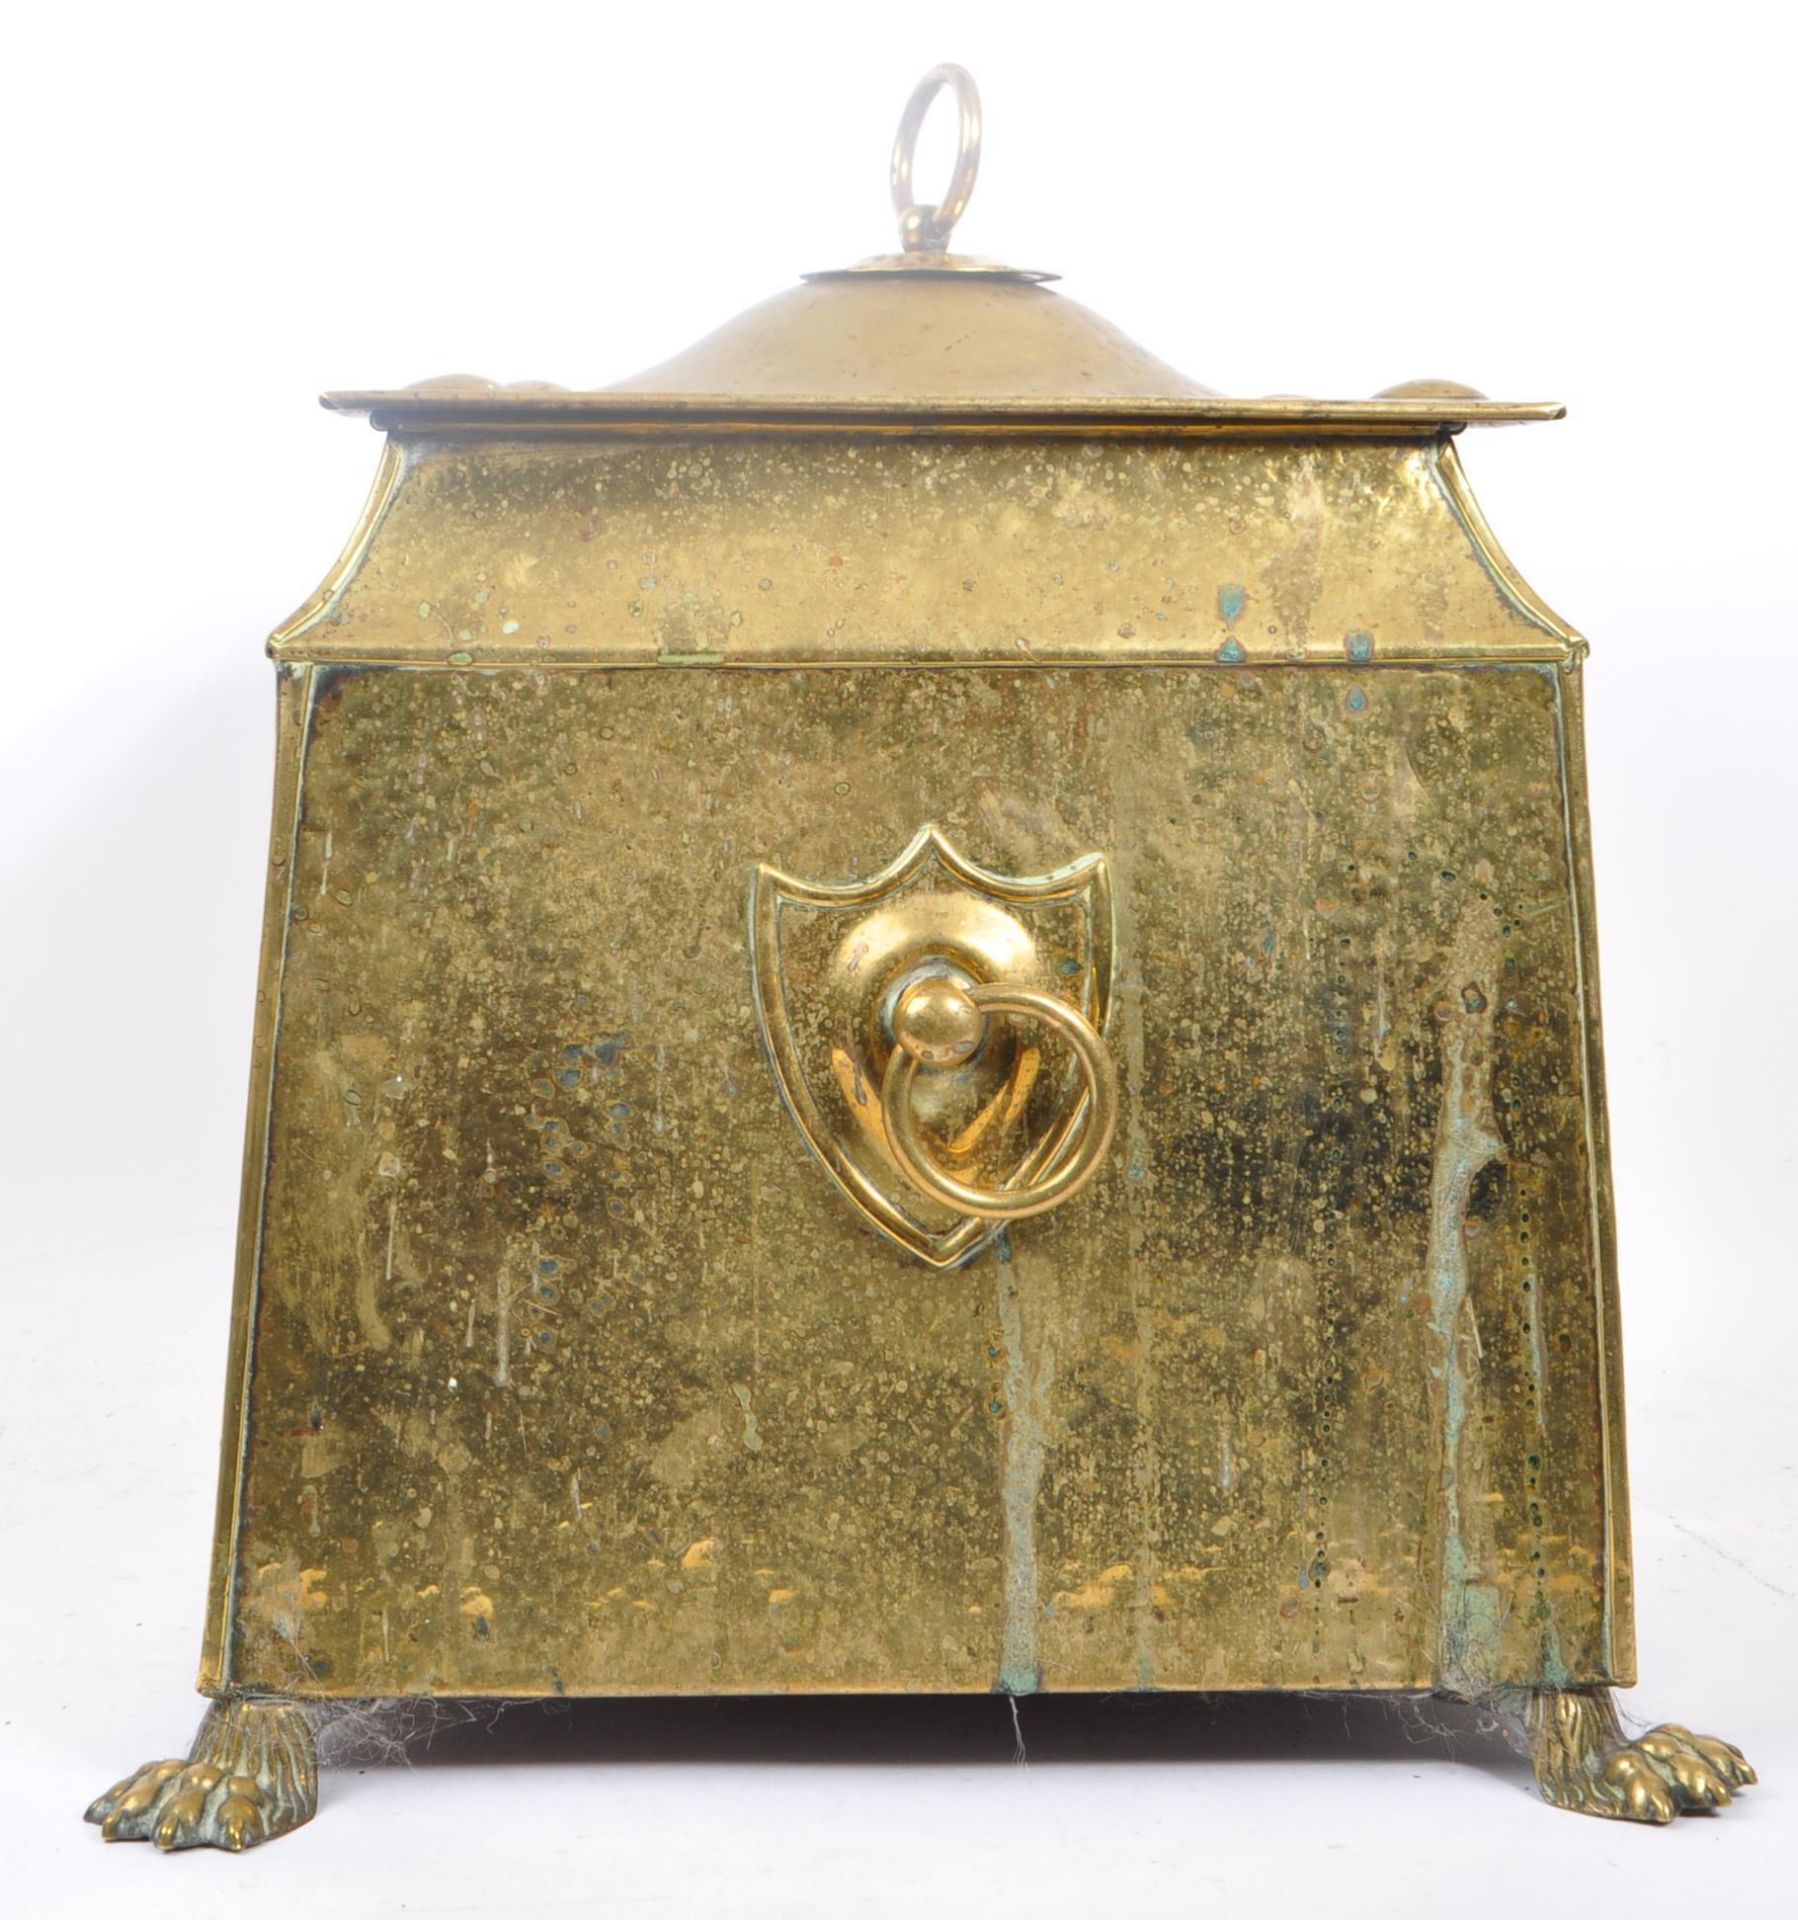 EARLY 20TH CENTURY BRASS ART NOUVEAU COAL SCUTTLE - Image 6 of 7